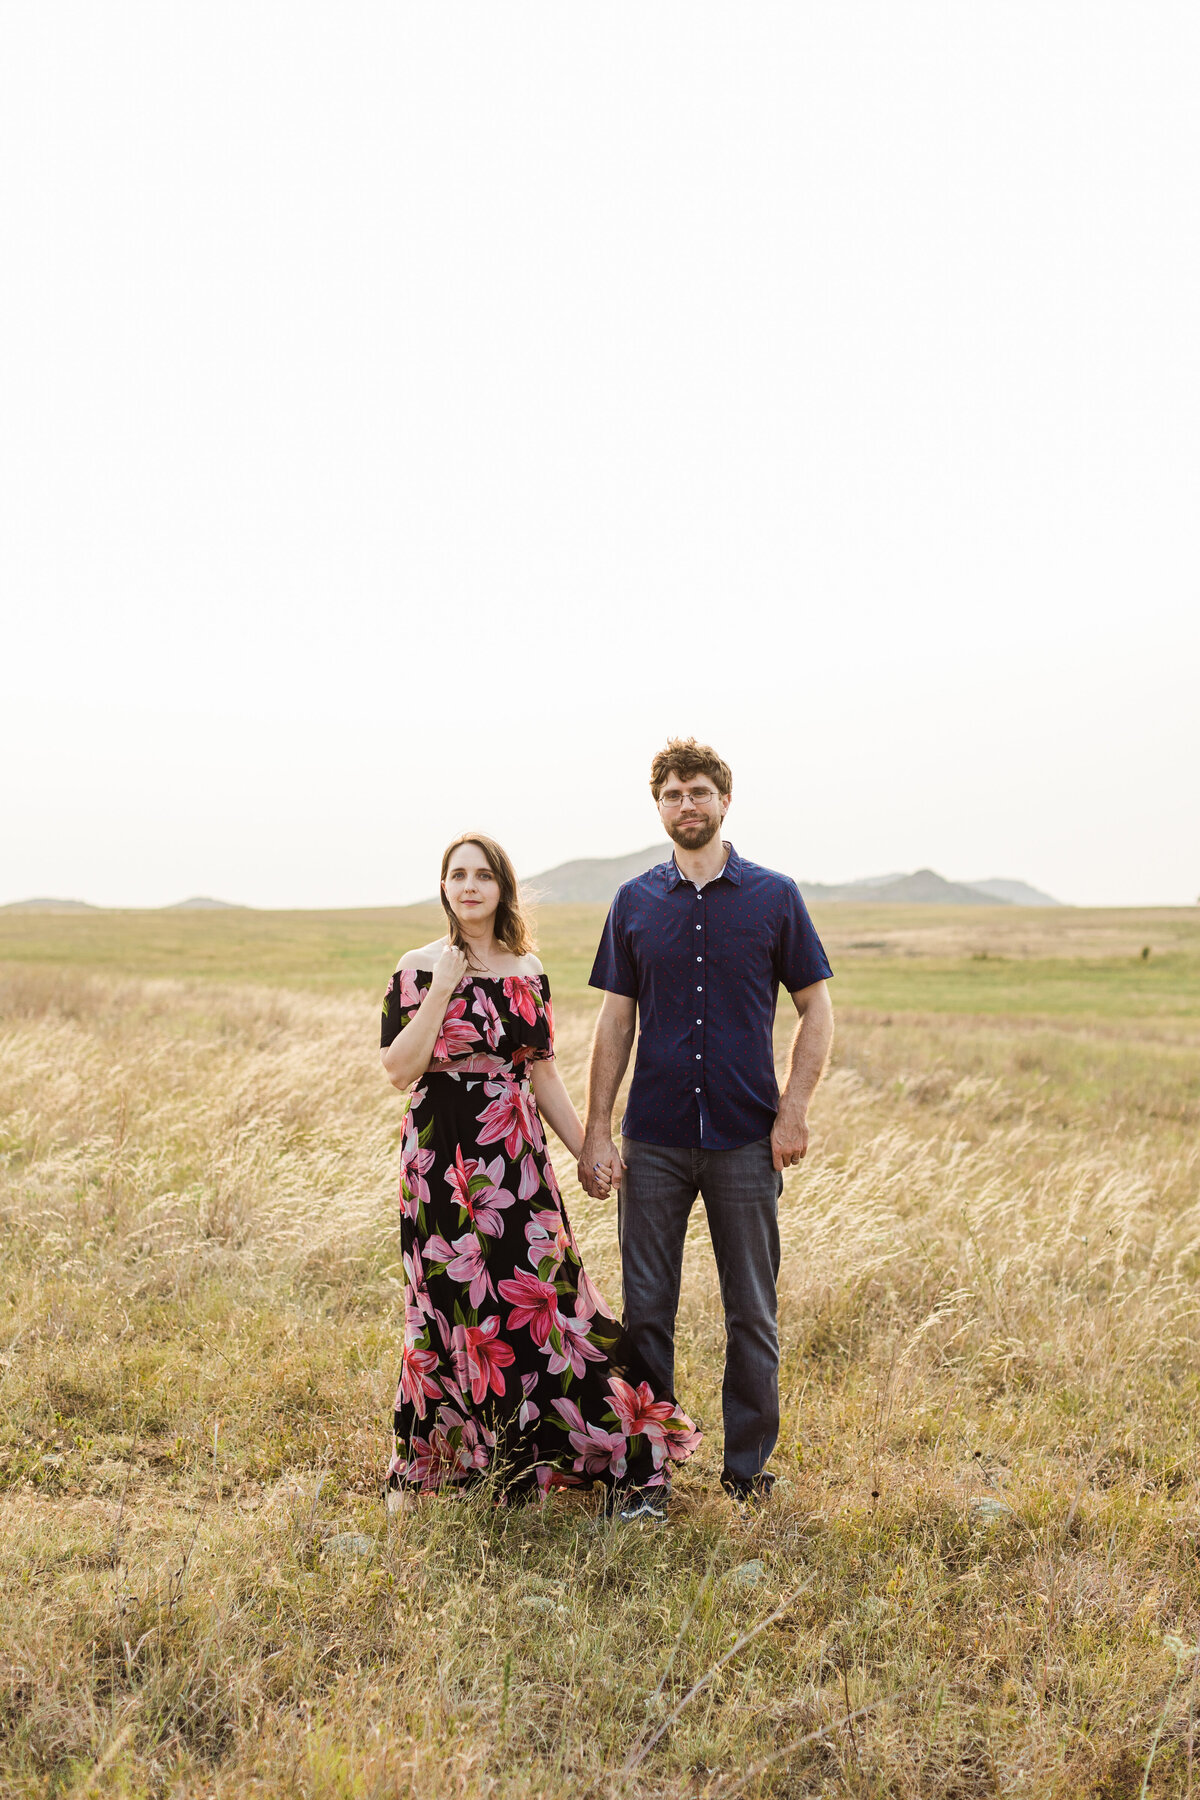 A couple holding hands in a field during their anniversary photo session in the Wichita Mountains in Oklahoma. The woman on the right is holding her hair with her right hand and is wearing a long black dress covered in large colorful flowers. The man on the right is wearing a blue dress shirt and dark means. Some of the Wichita Mountains can be seen far off in the background.